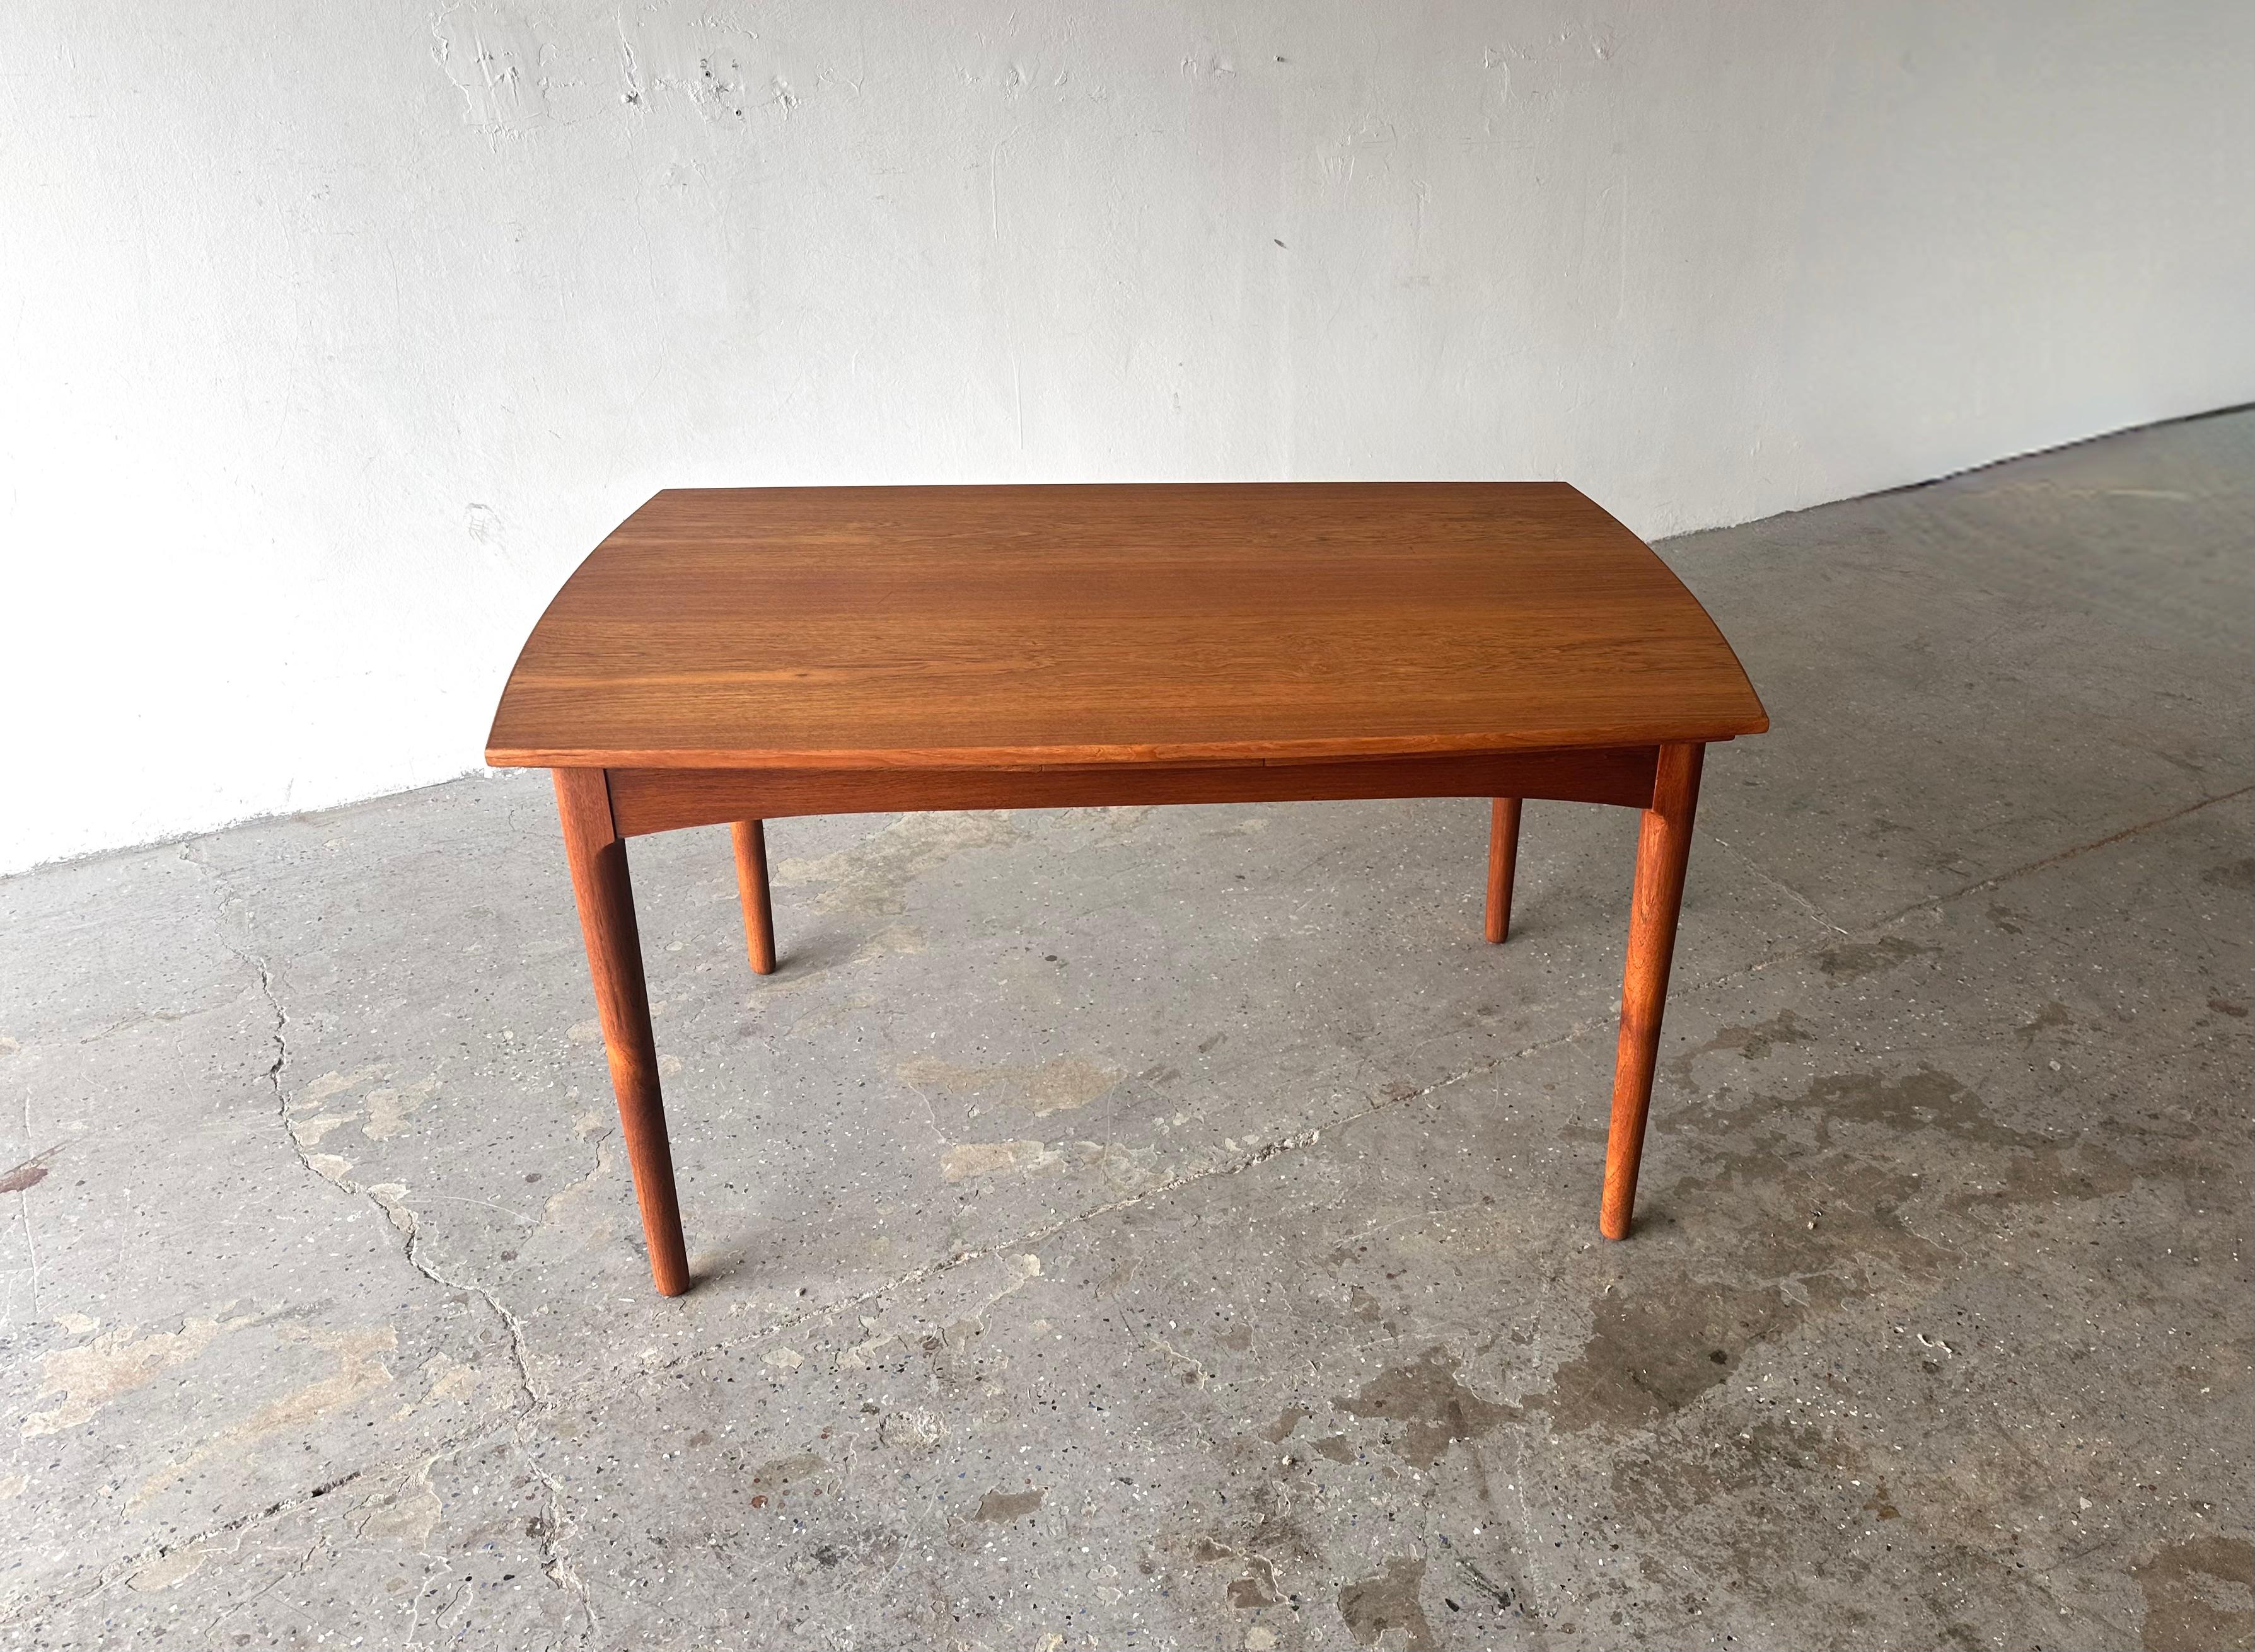 
Stunning 1960's Danish Modern Teak Dining Table
Crafted from rich, warm teak , this table exudes elegance and sophistication. Its sleek, minimalist design is enhanced by the natural grain of the teak  showcasing the beauty of its original